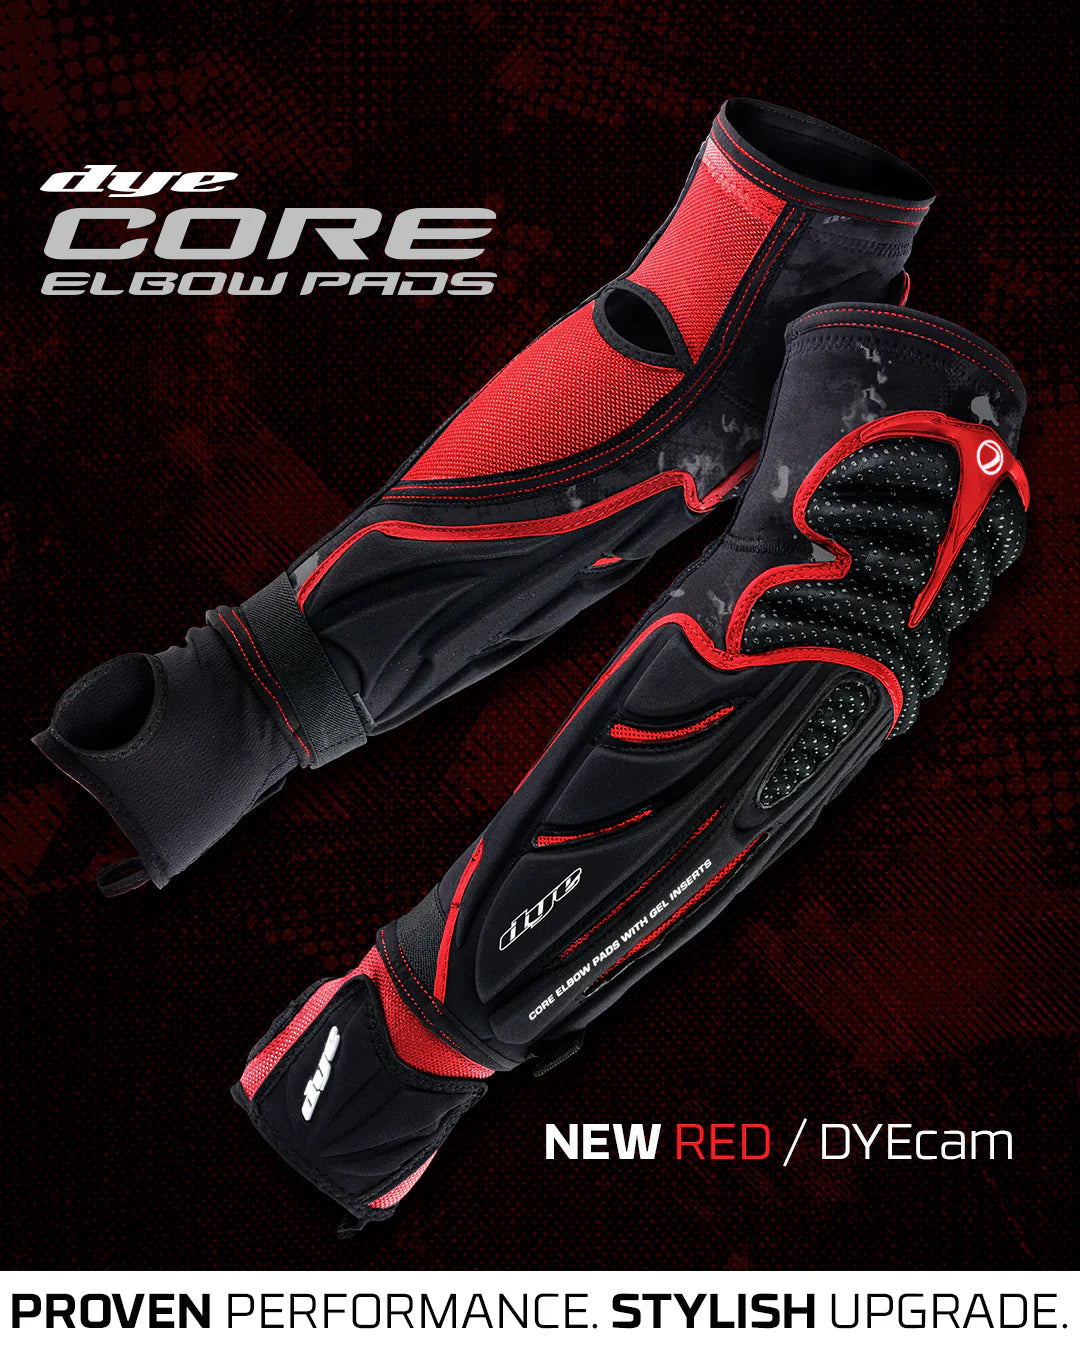 Dye Precision PERFORMANCE ELBOW PADS - DYECAM RED - ssairsoft.com